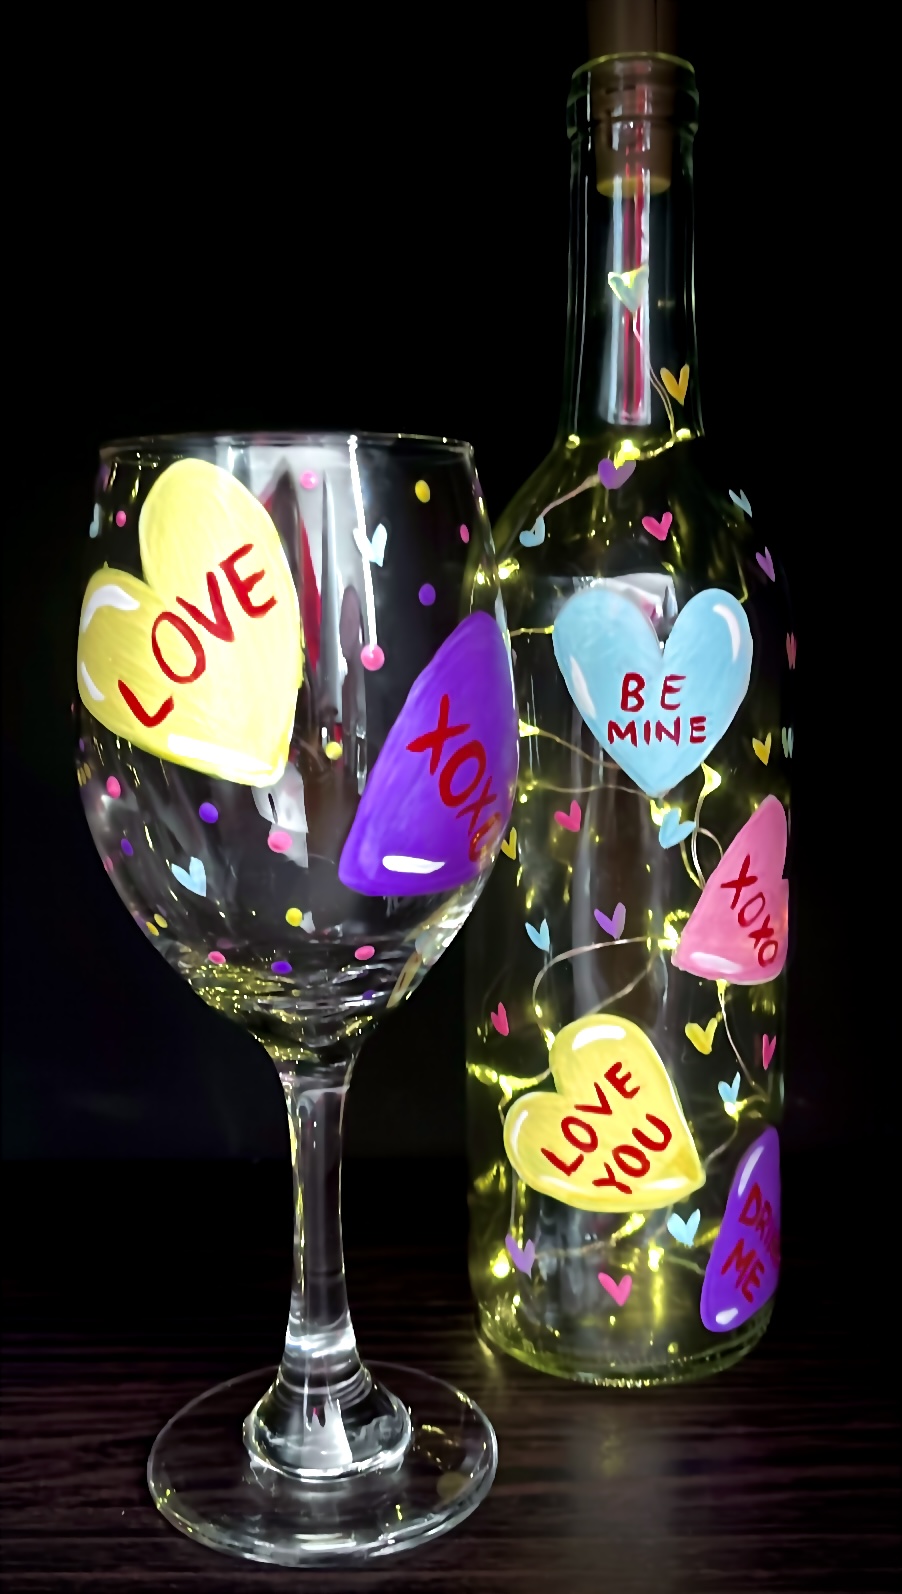 A Candy Love Wine glass and Wine Bottle with Fairy lights  experience project by Yaymaker